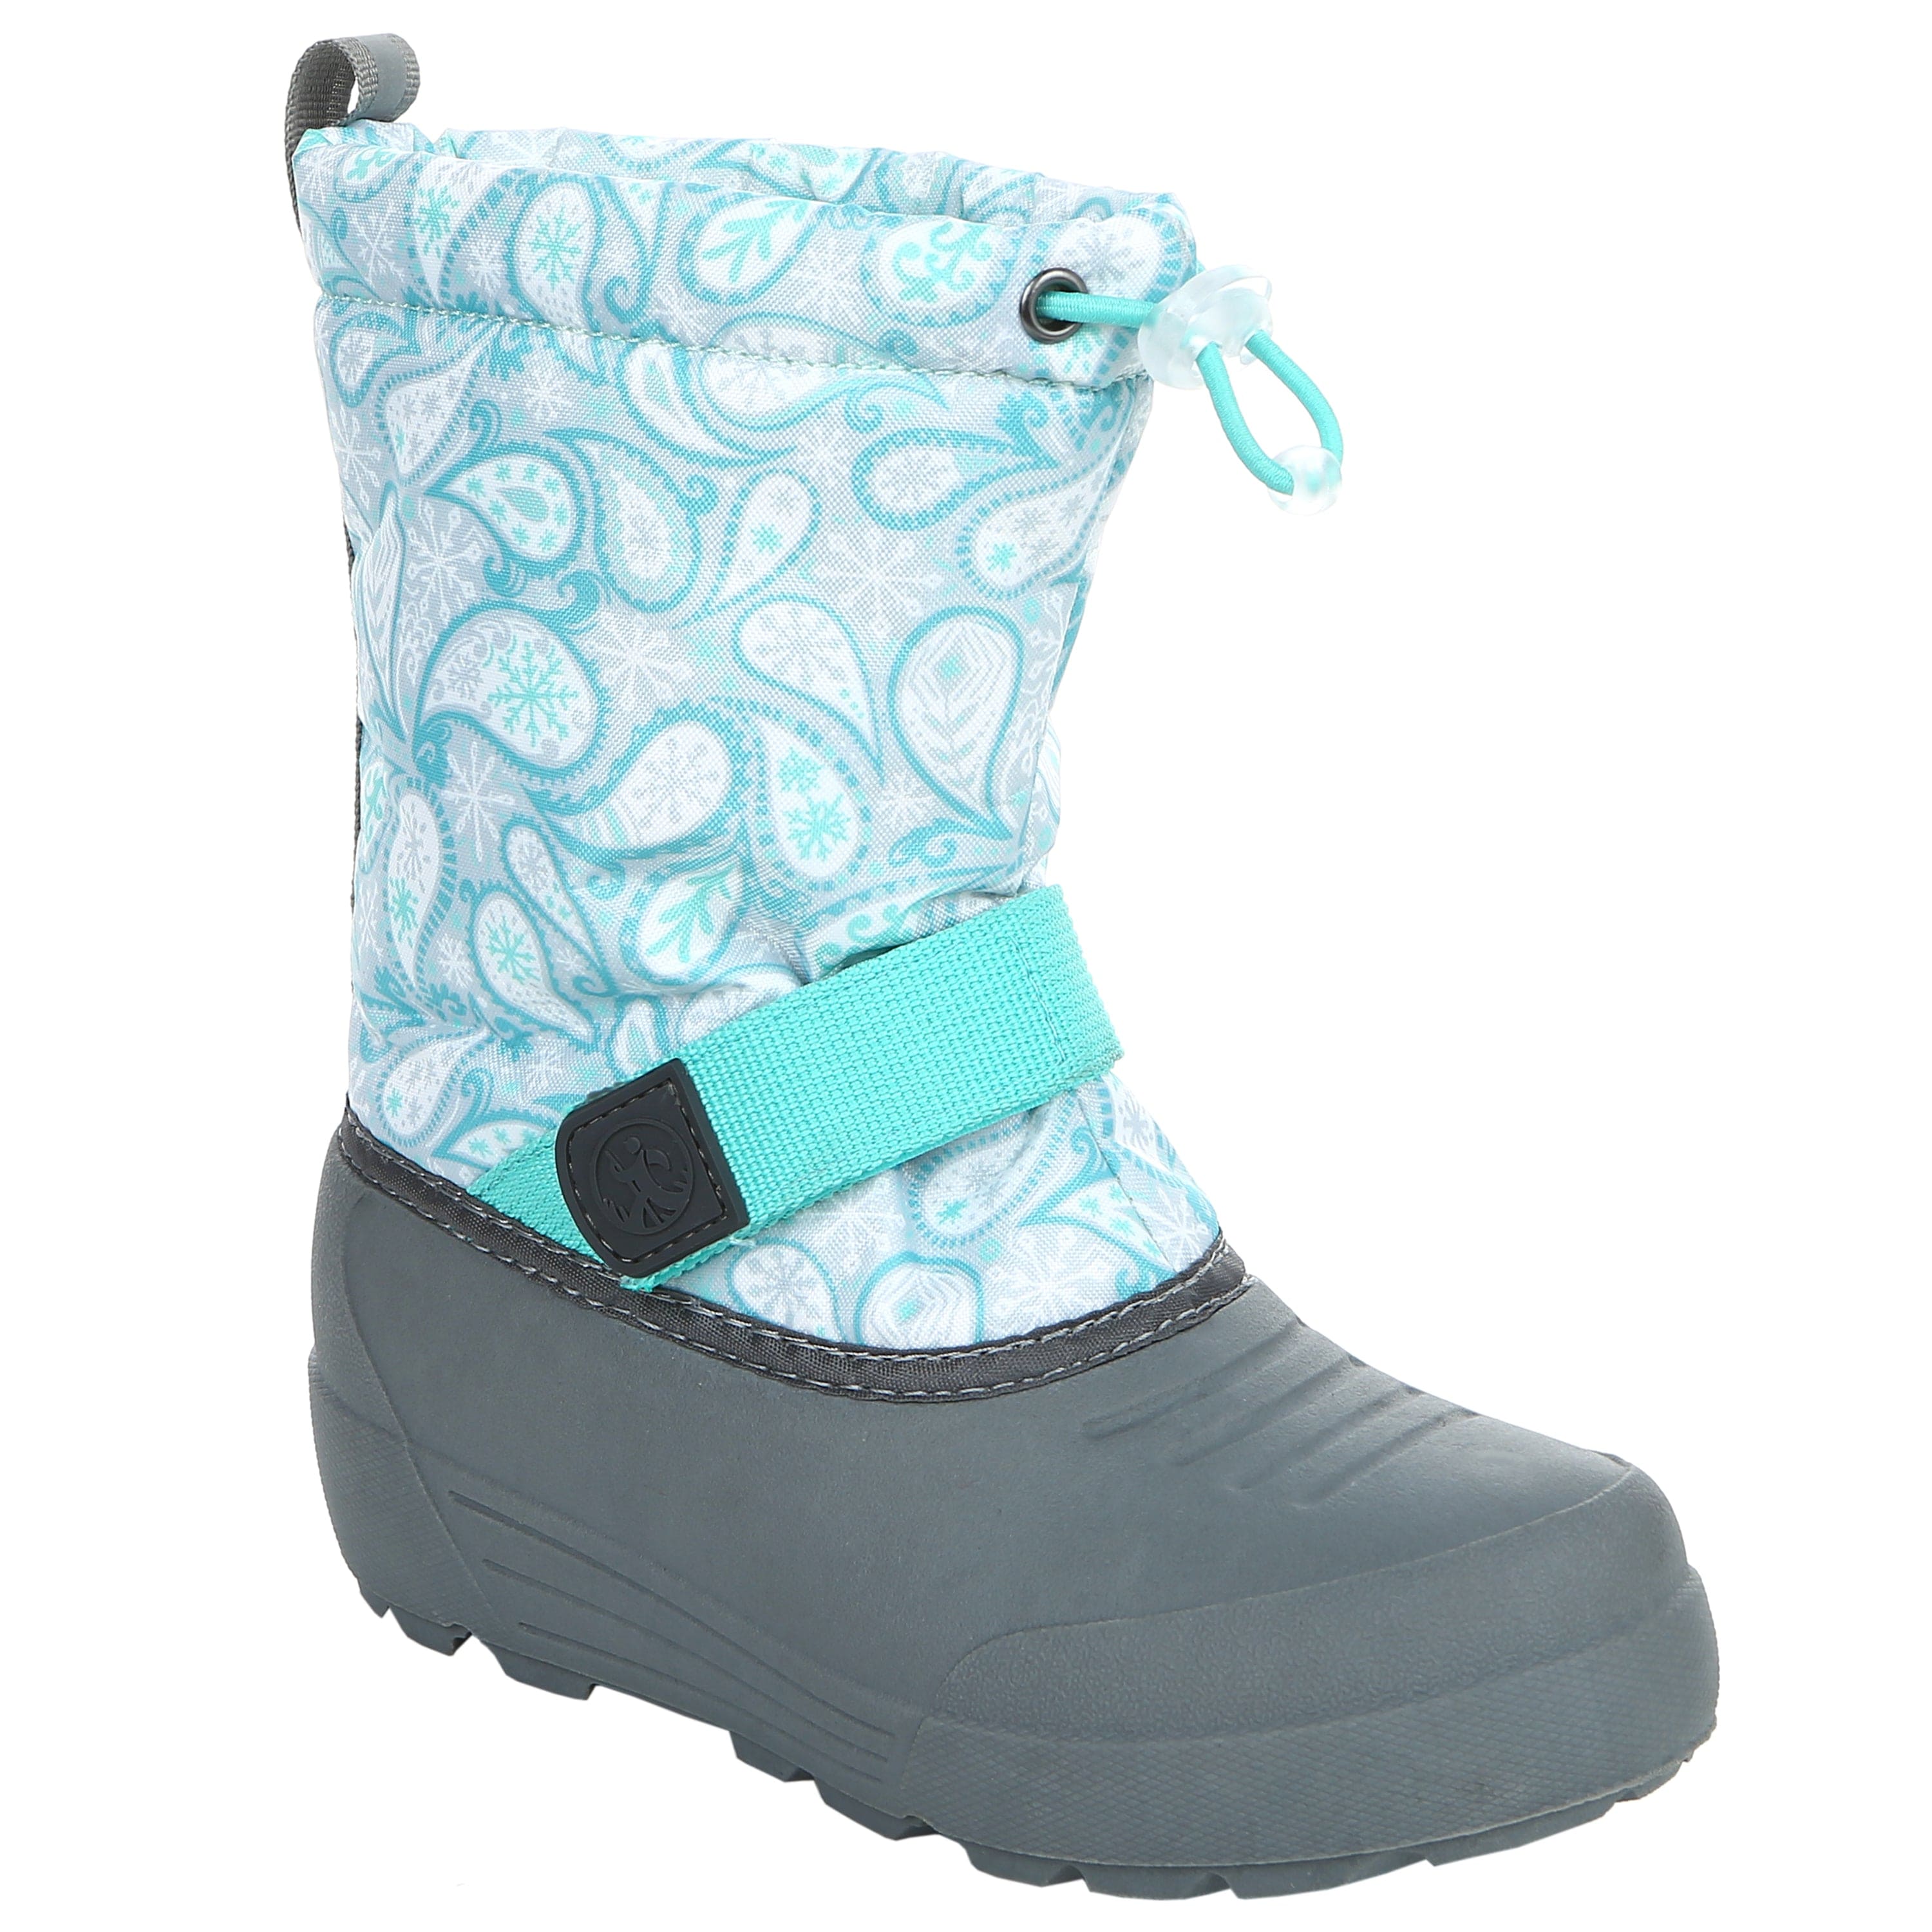 winter boots for kids cute blue